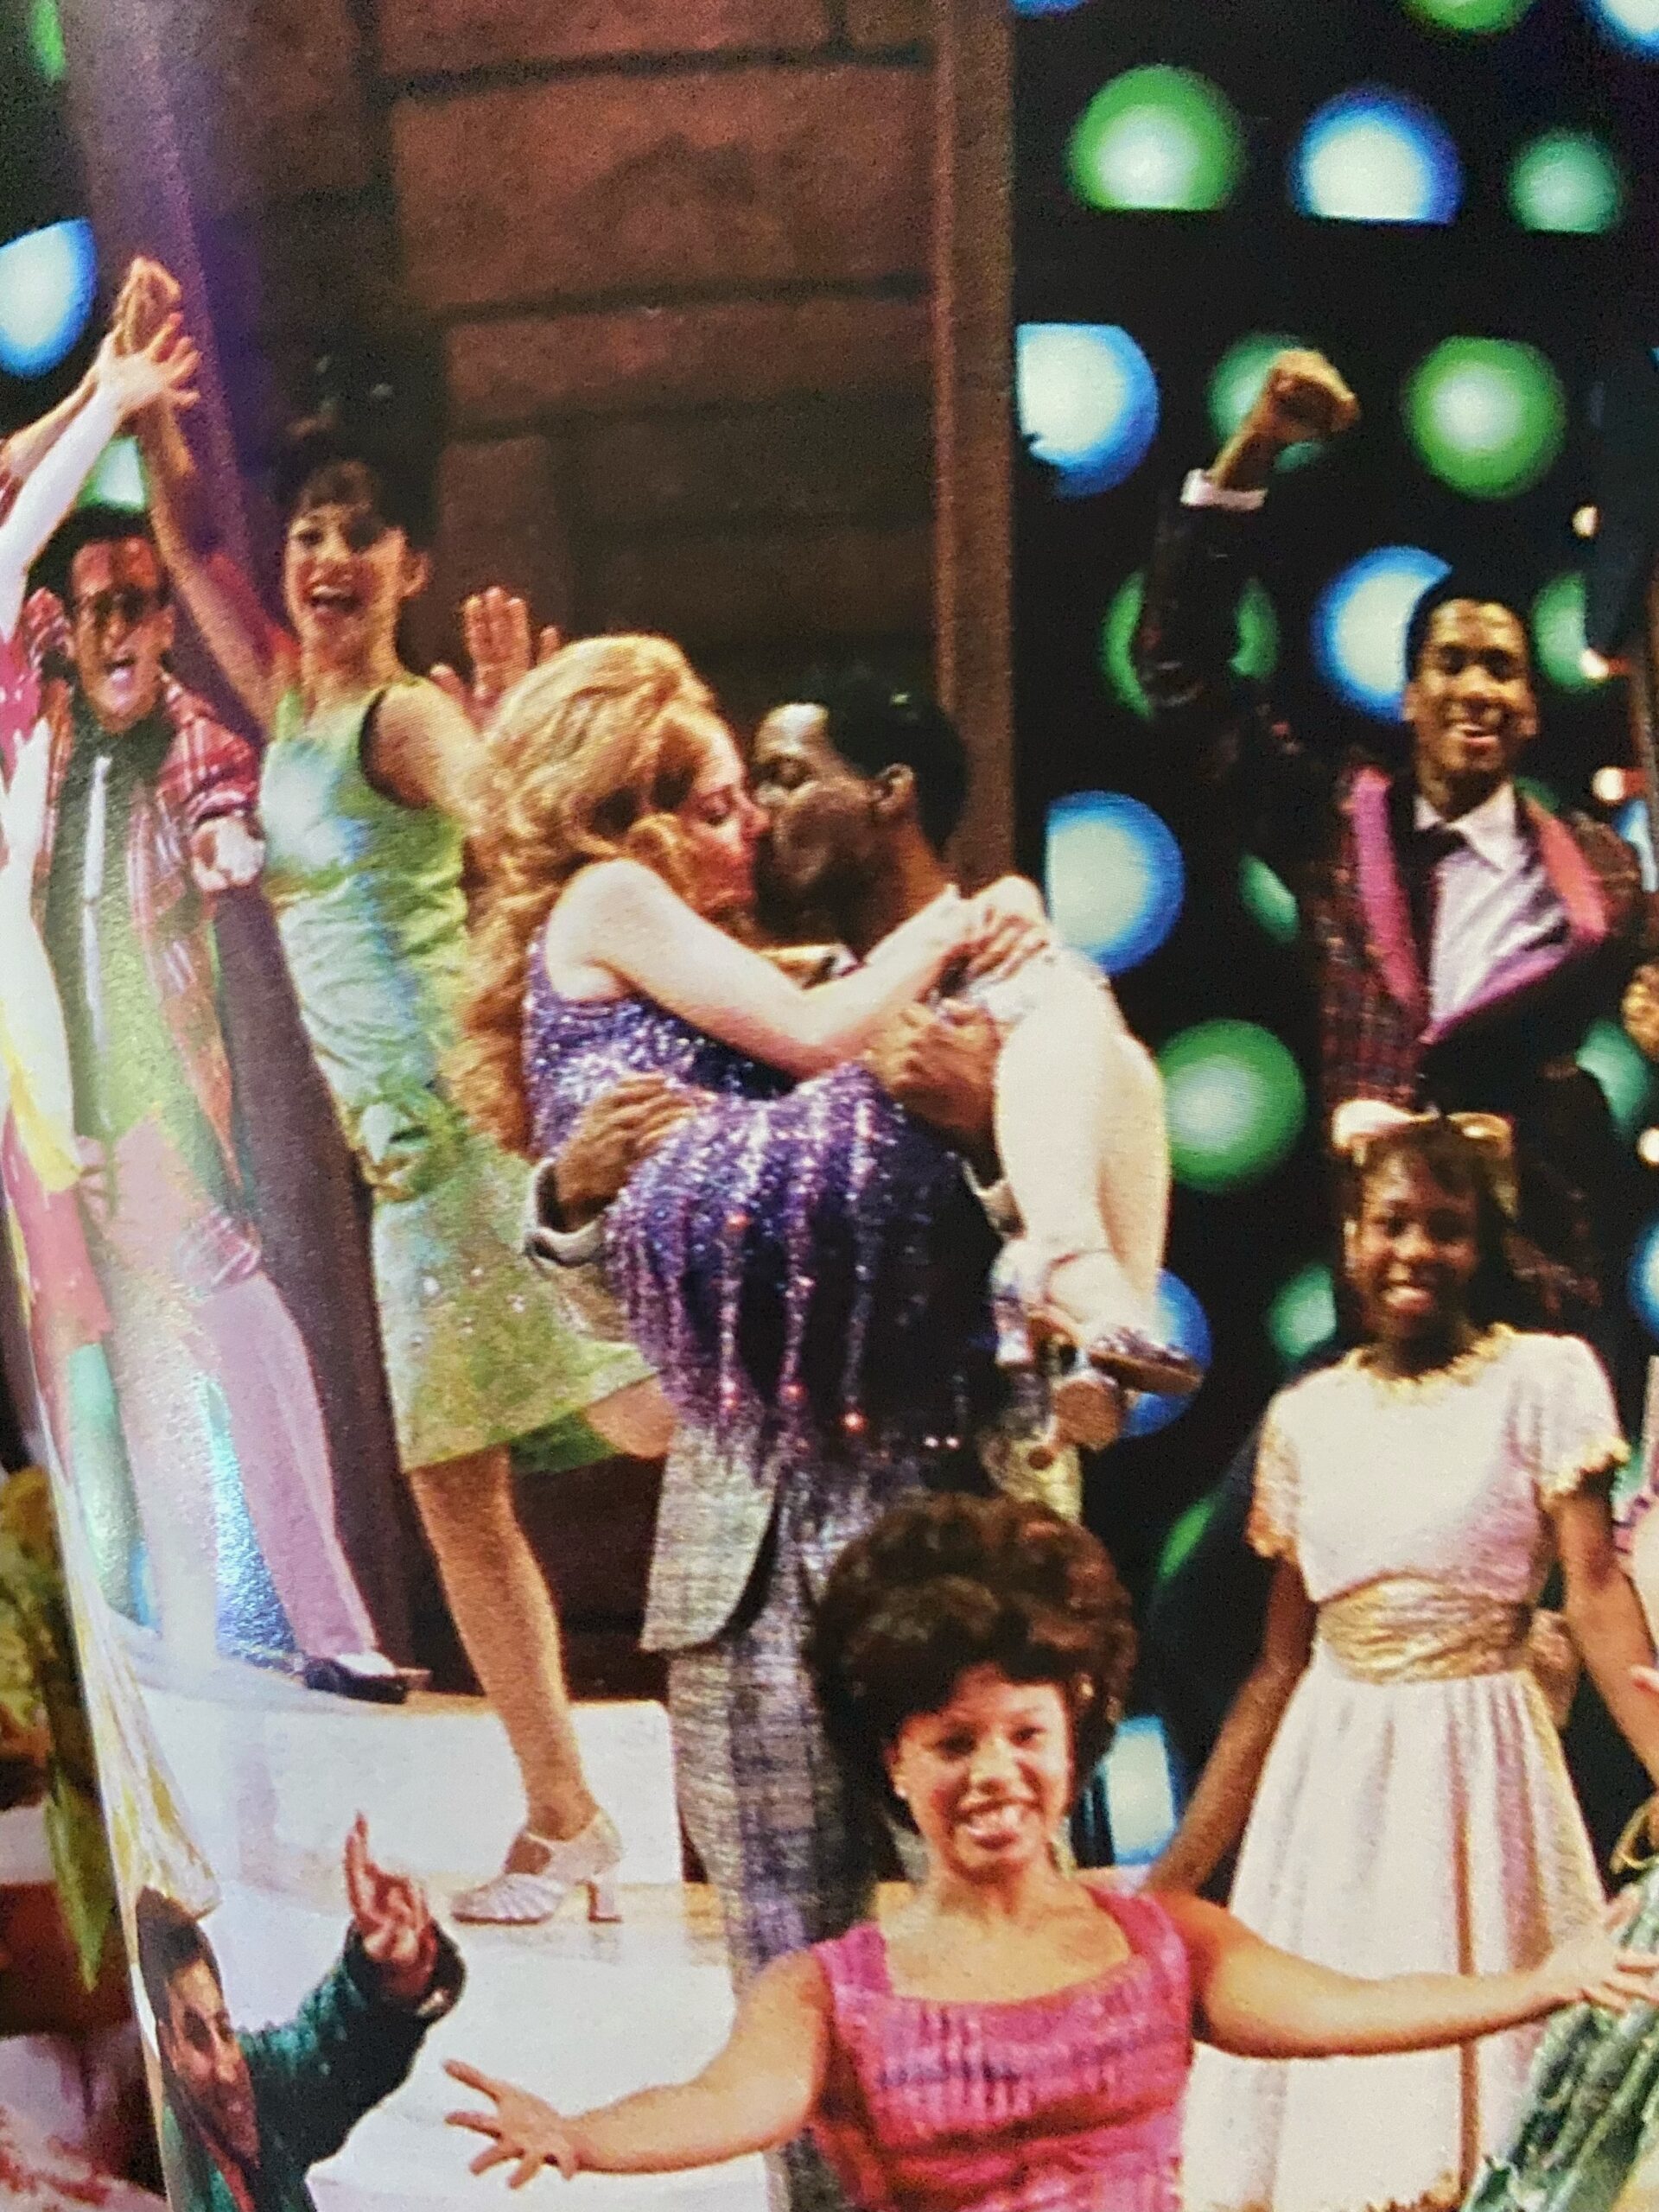 Kerry Butler in Hairspray. Photo Courtesy of Kerry Butler.